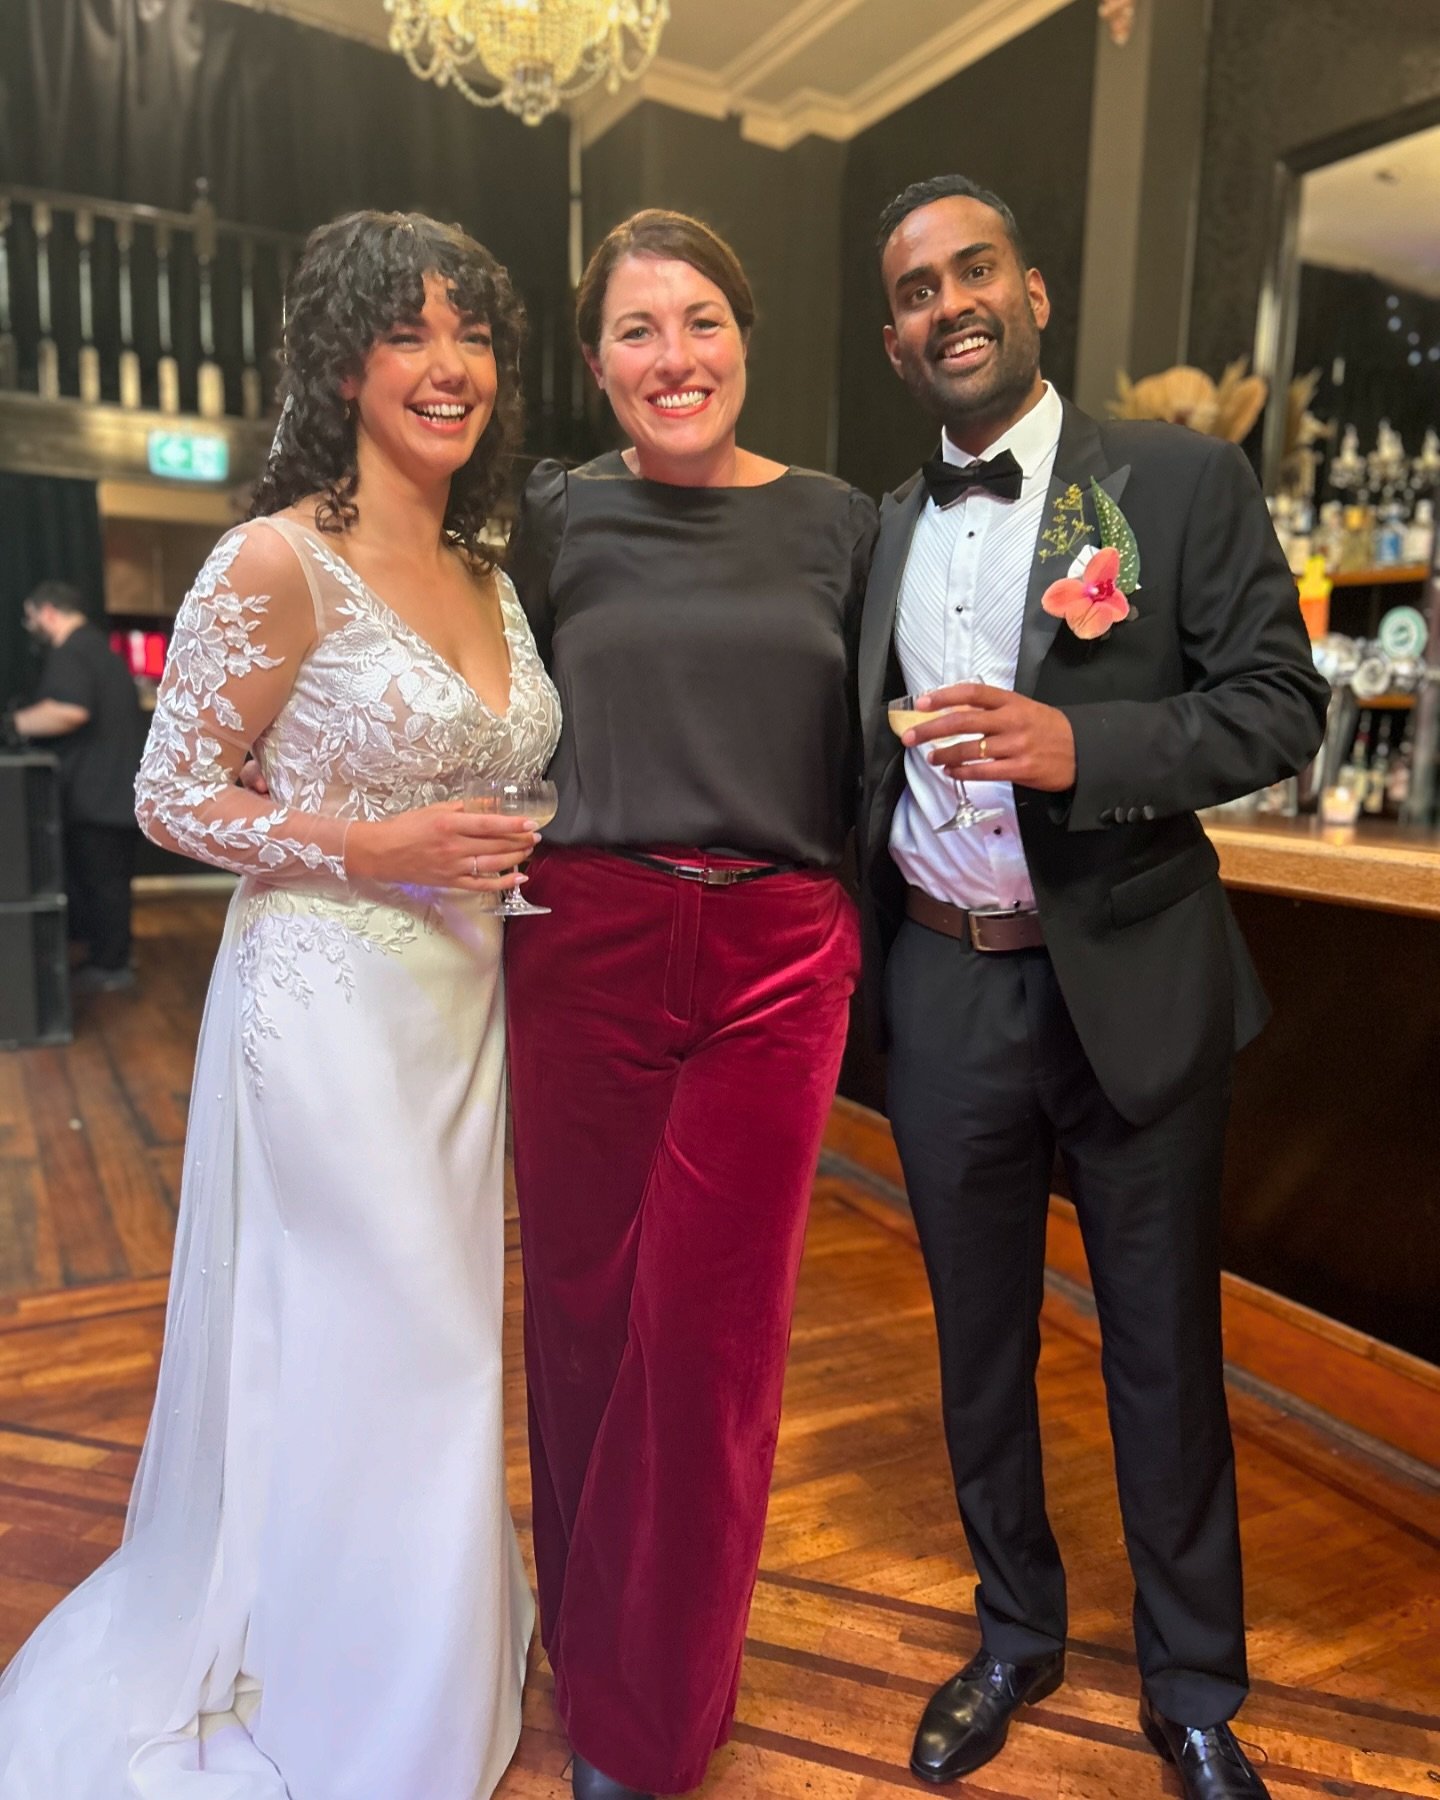 MARRIED! Erin and Ashwin locked it down this arvo at the @brunswick.ballroom. Live music by Erin&rsquo;s talented fam welcomed guests as they arrived. 
.
It was a spectacular riot of colour under the chandeliers. There were a lot of laughs and a few 